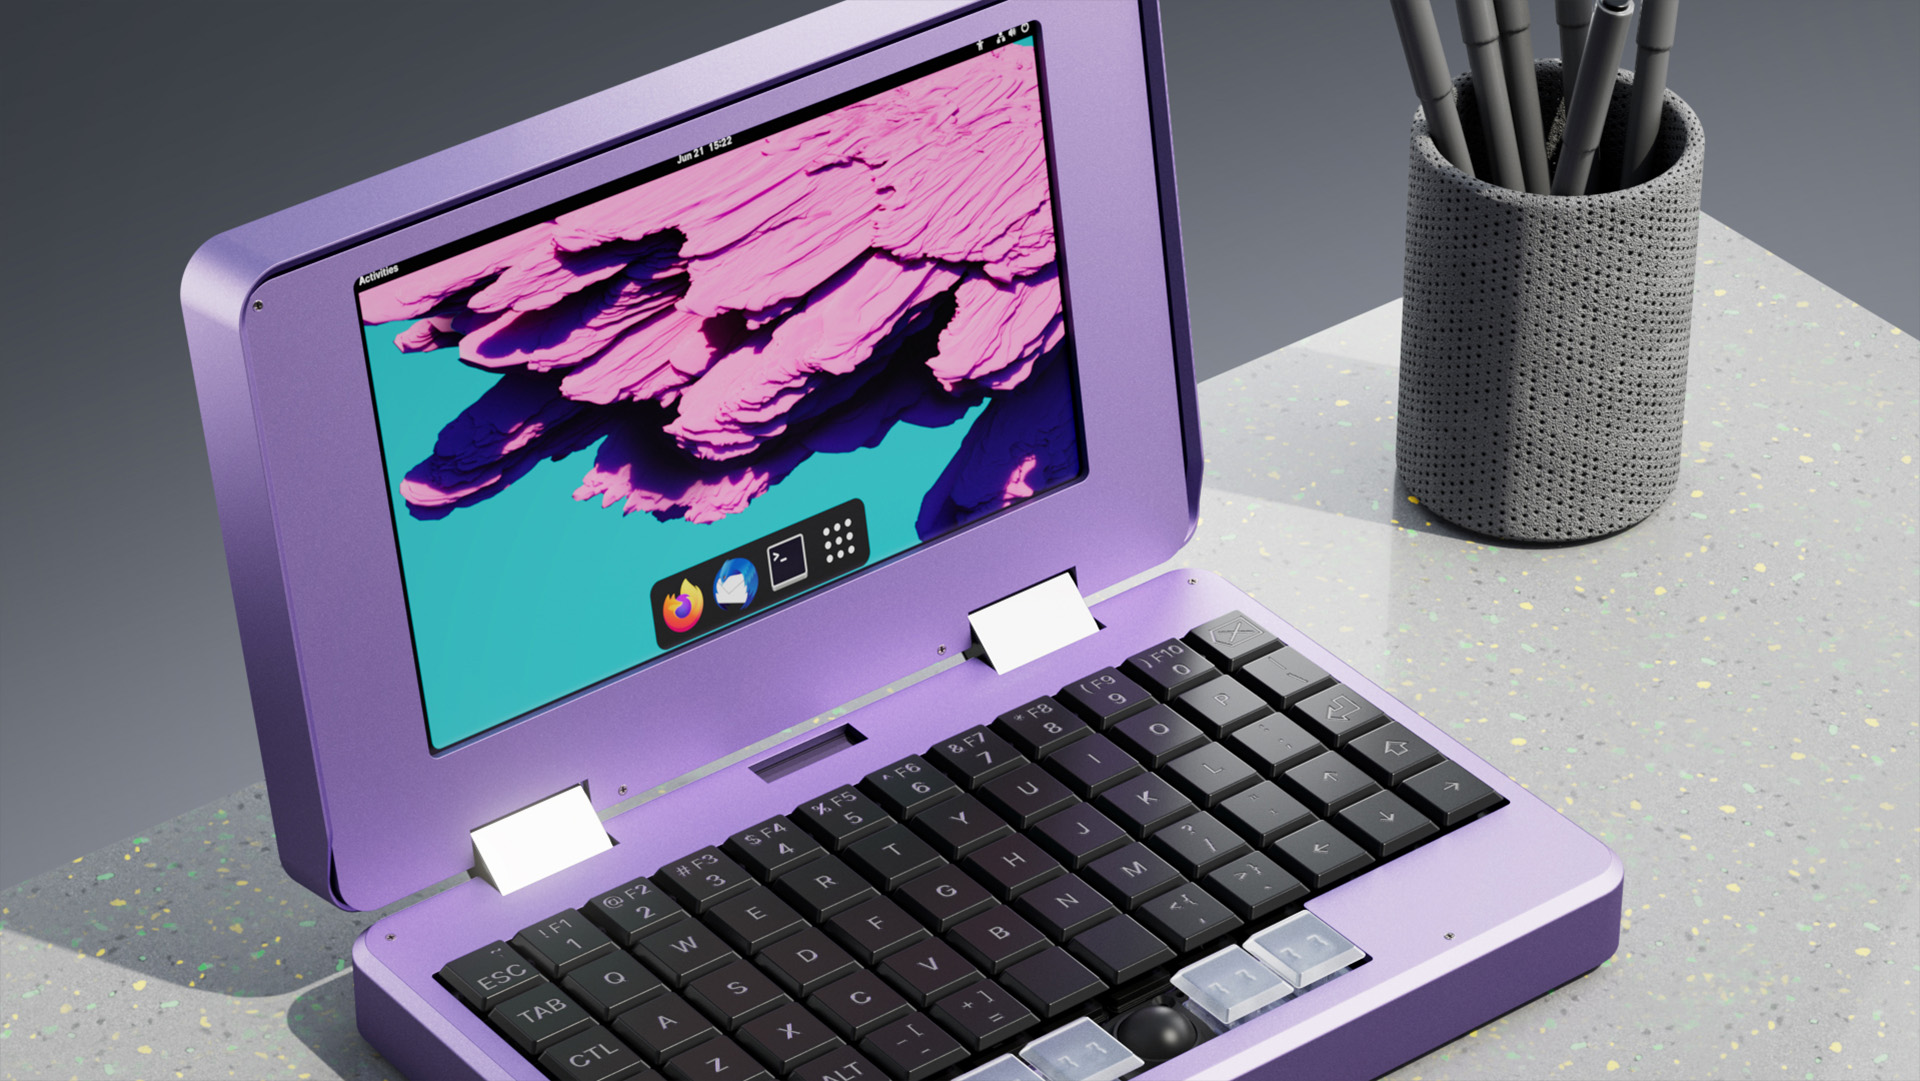  Gaming laptops could learn a lot from this adorable open source mini laptop 